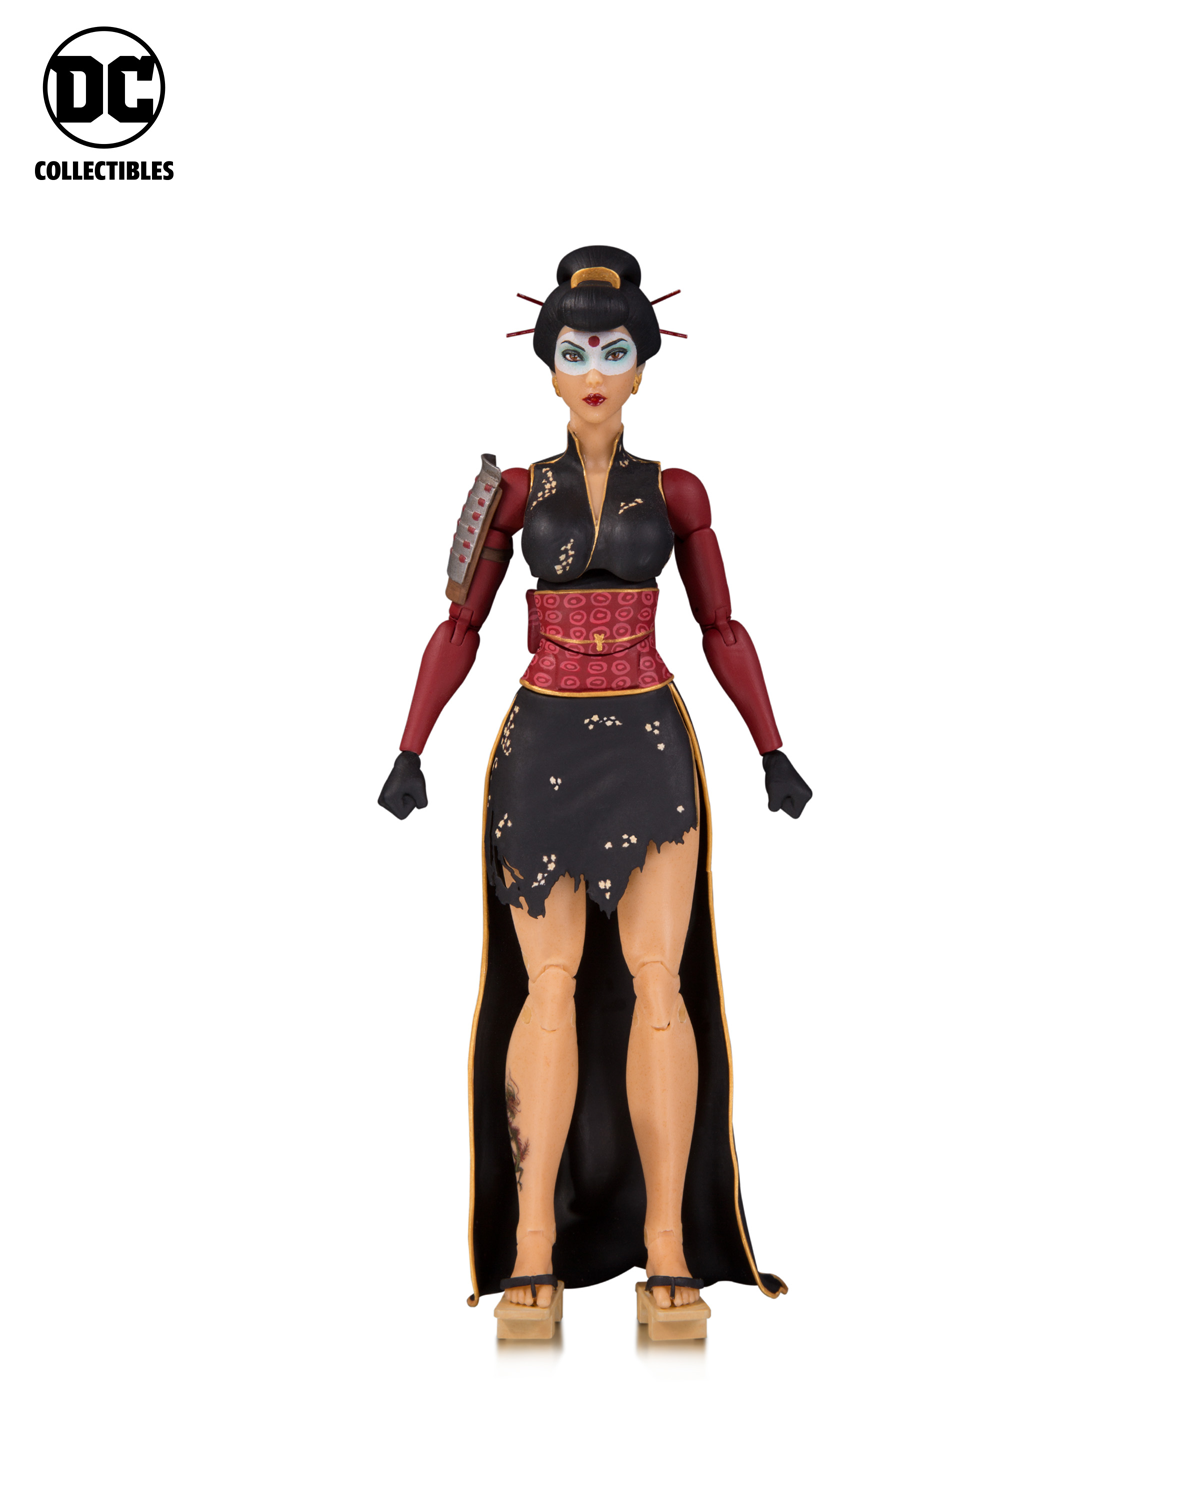 A New Wave Of DC’s Bombshells Merch Is Ready To Drop On Your Bank Account 